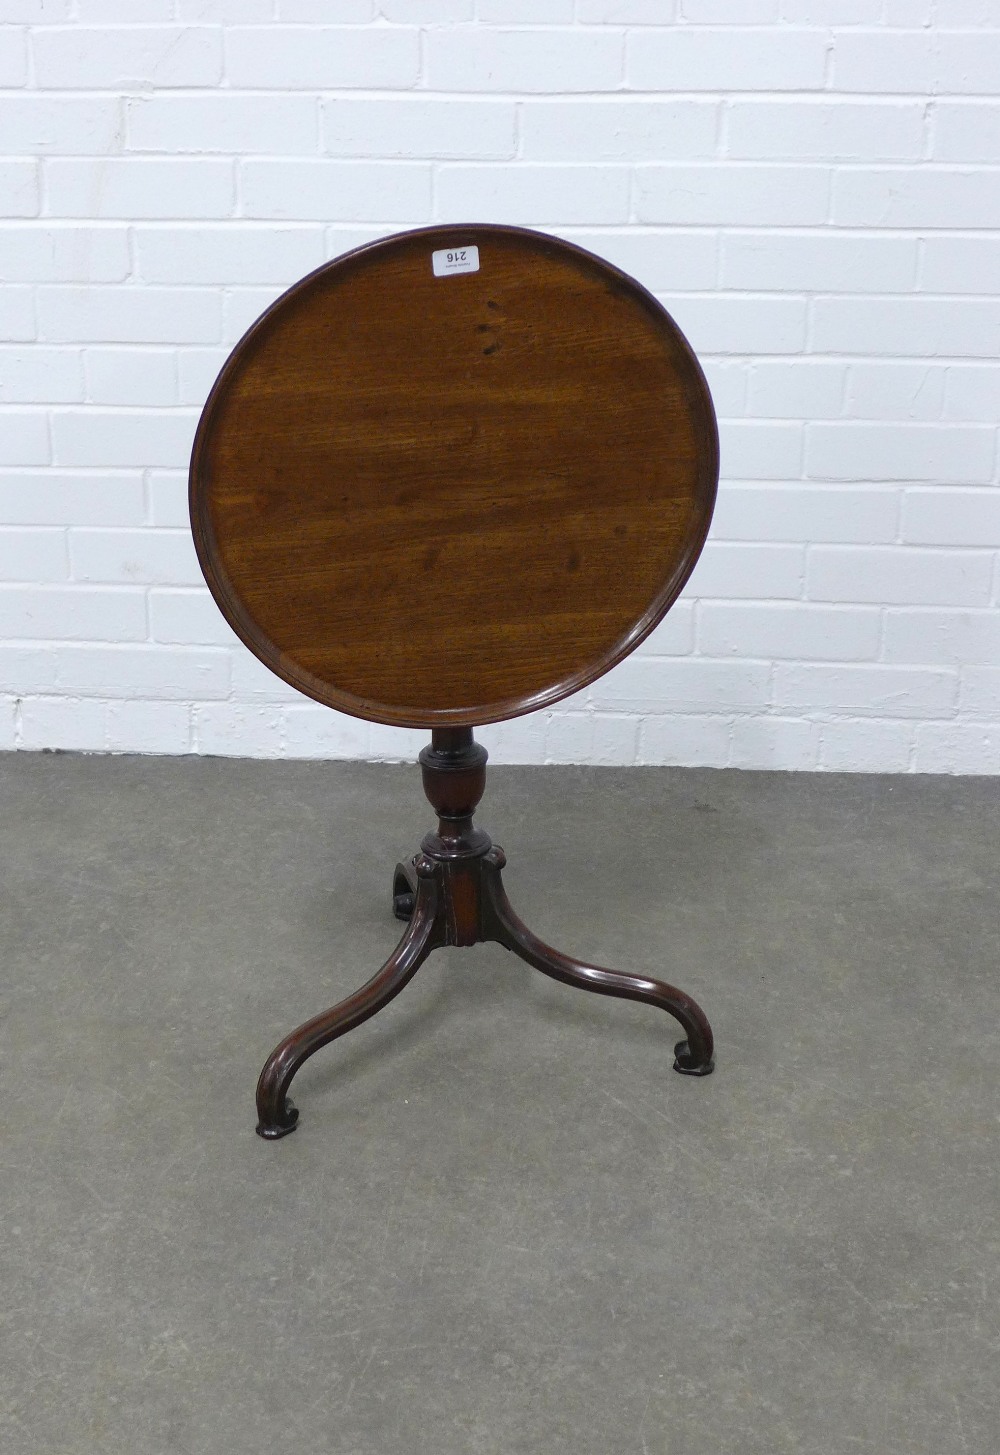 Mahogany tilt top wine table with a circular dished top, on a pedestal base with elegant tripod legs - Image 4 of 4